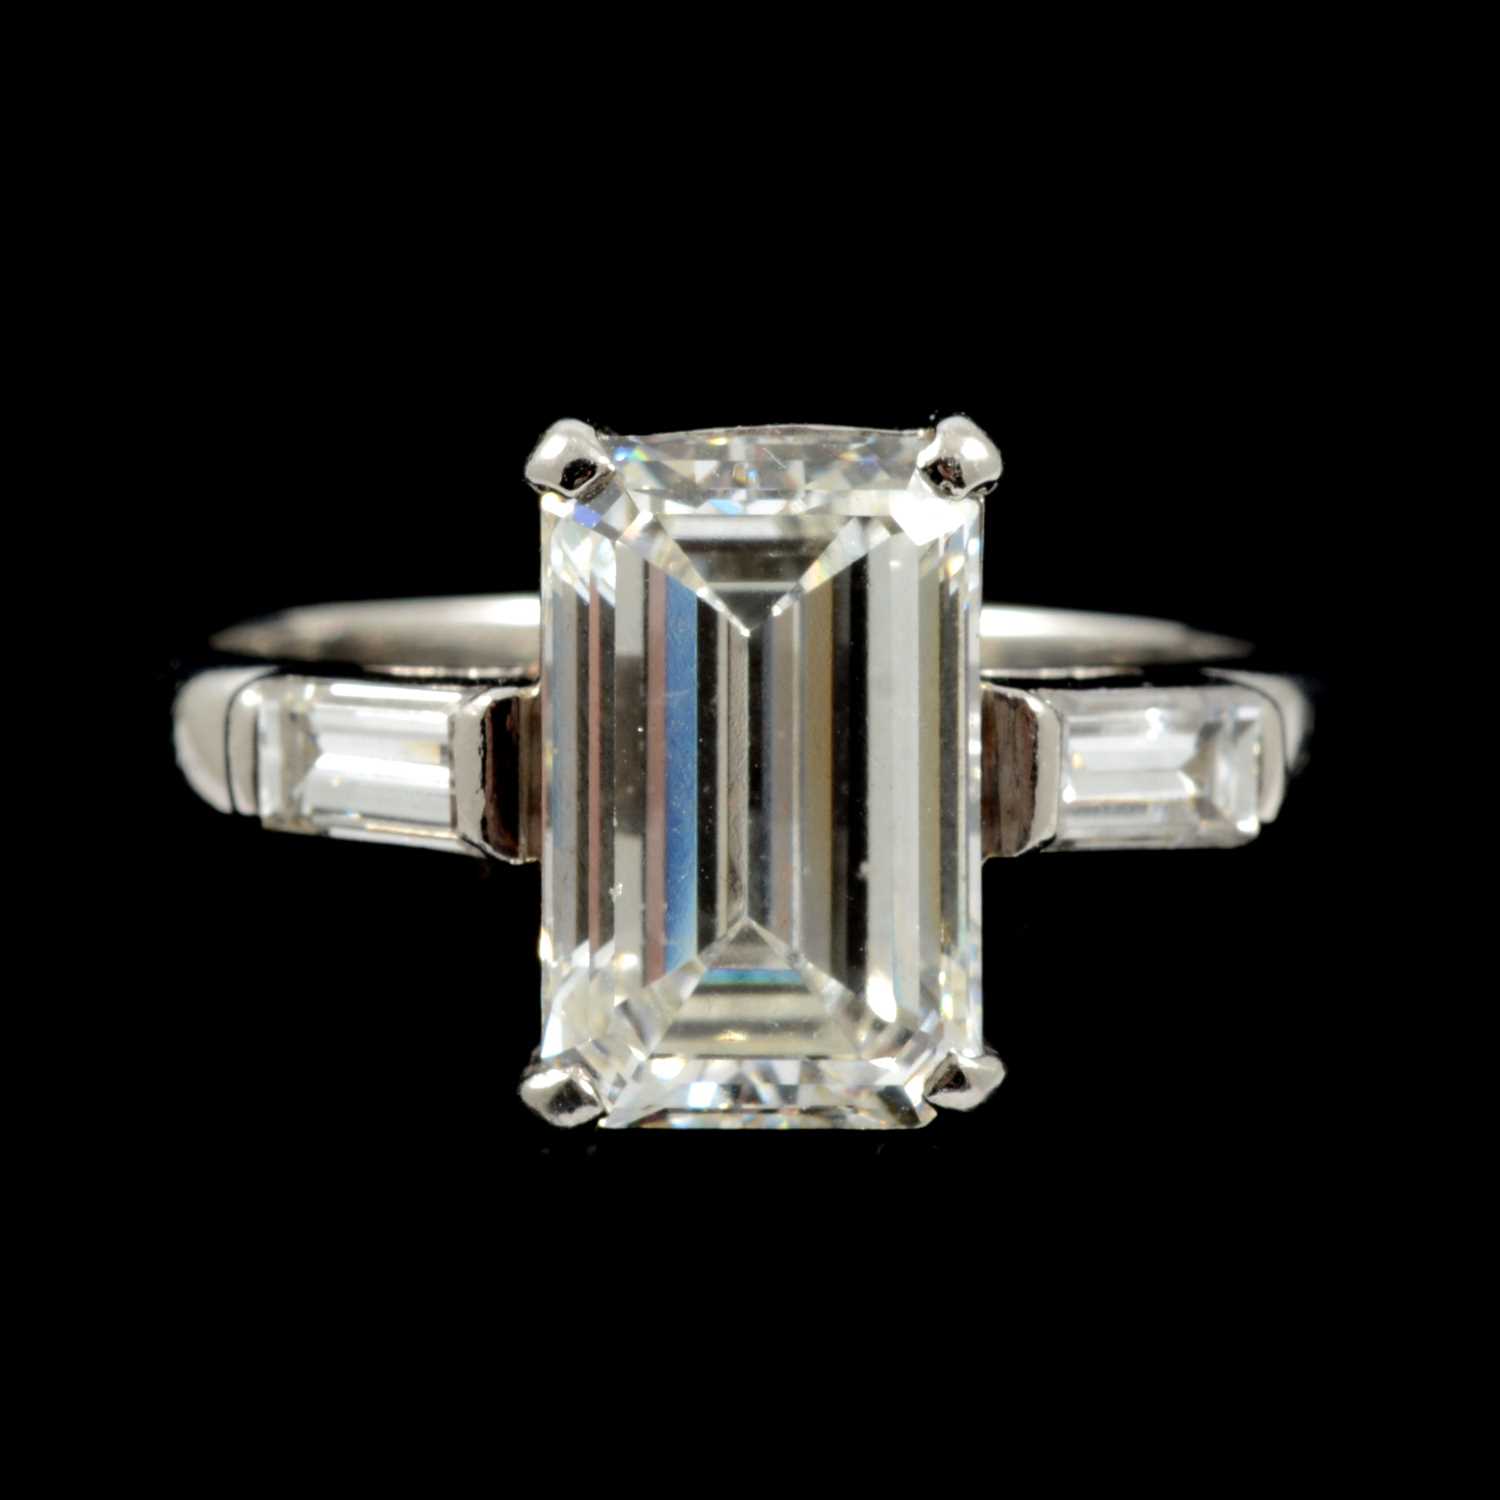 15 - A diamond solitaire ring, emerald step cut stone, 2.62 carats.